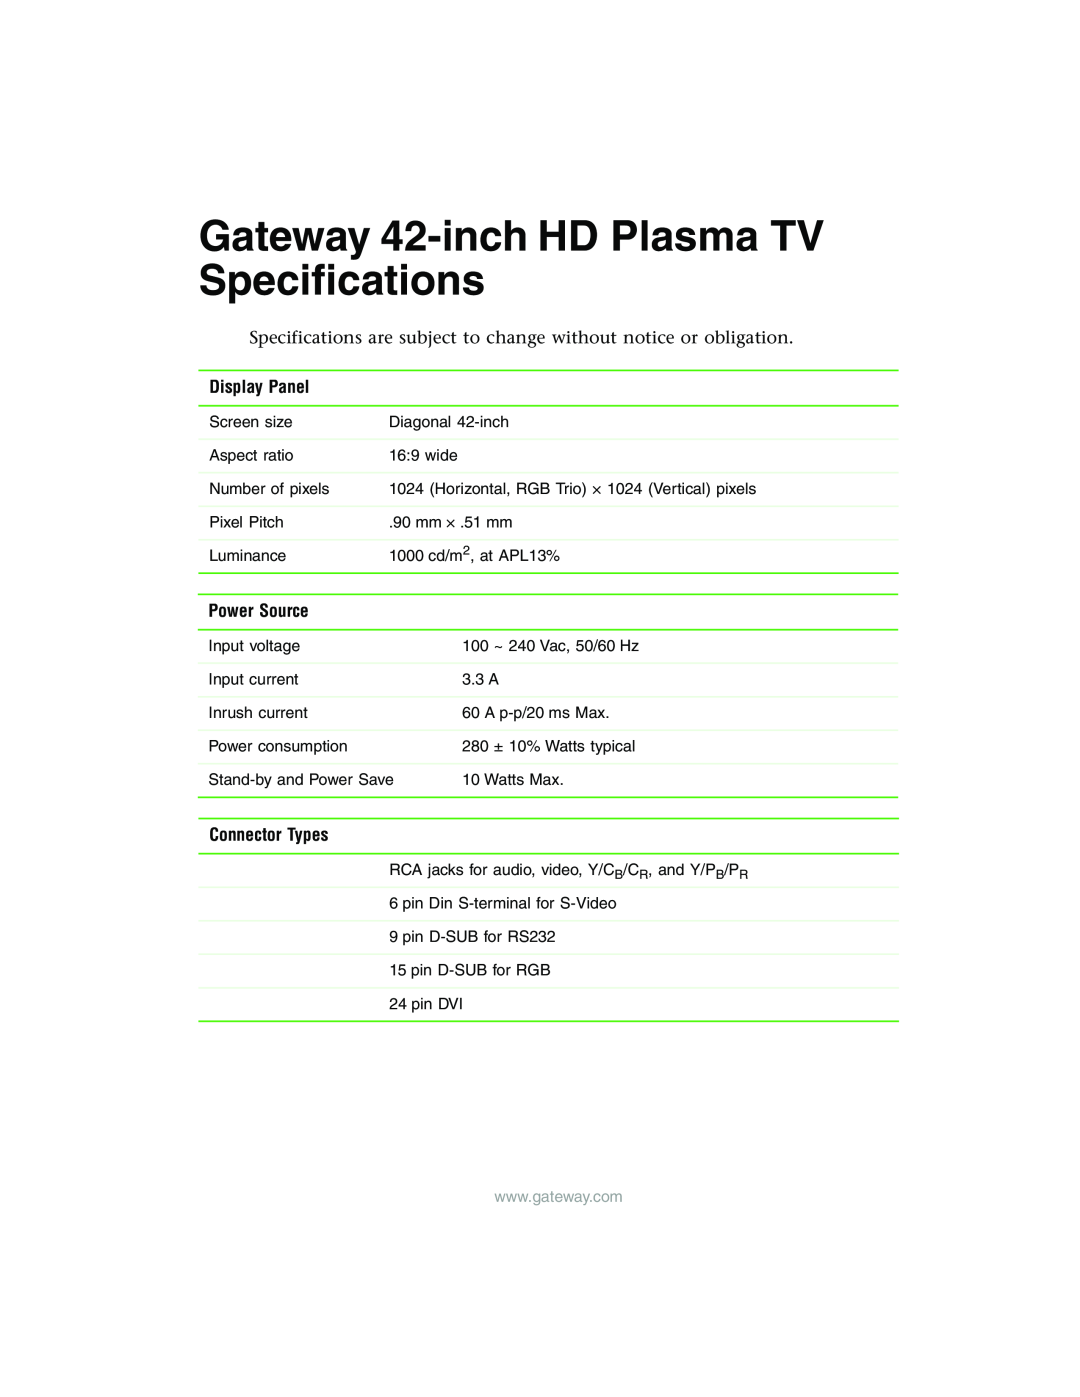 Gateway HD Plasma TV specifications Specifications are subject to change without notice or obligation, Display Panel 